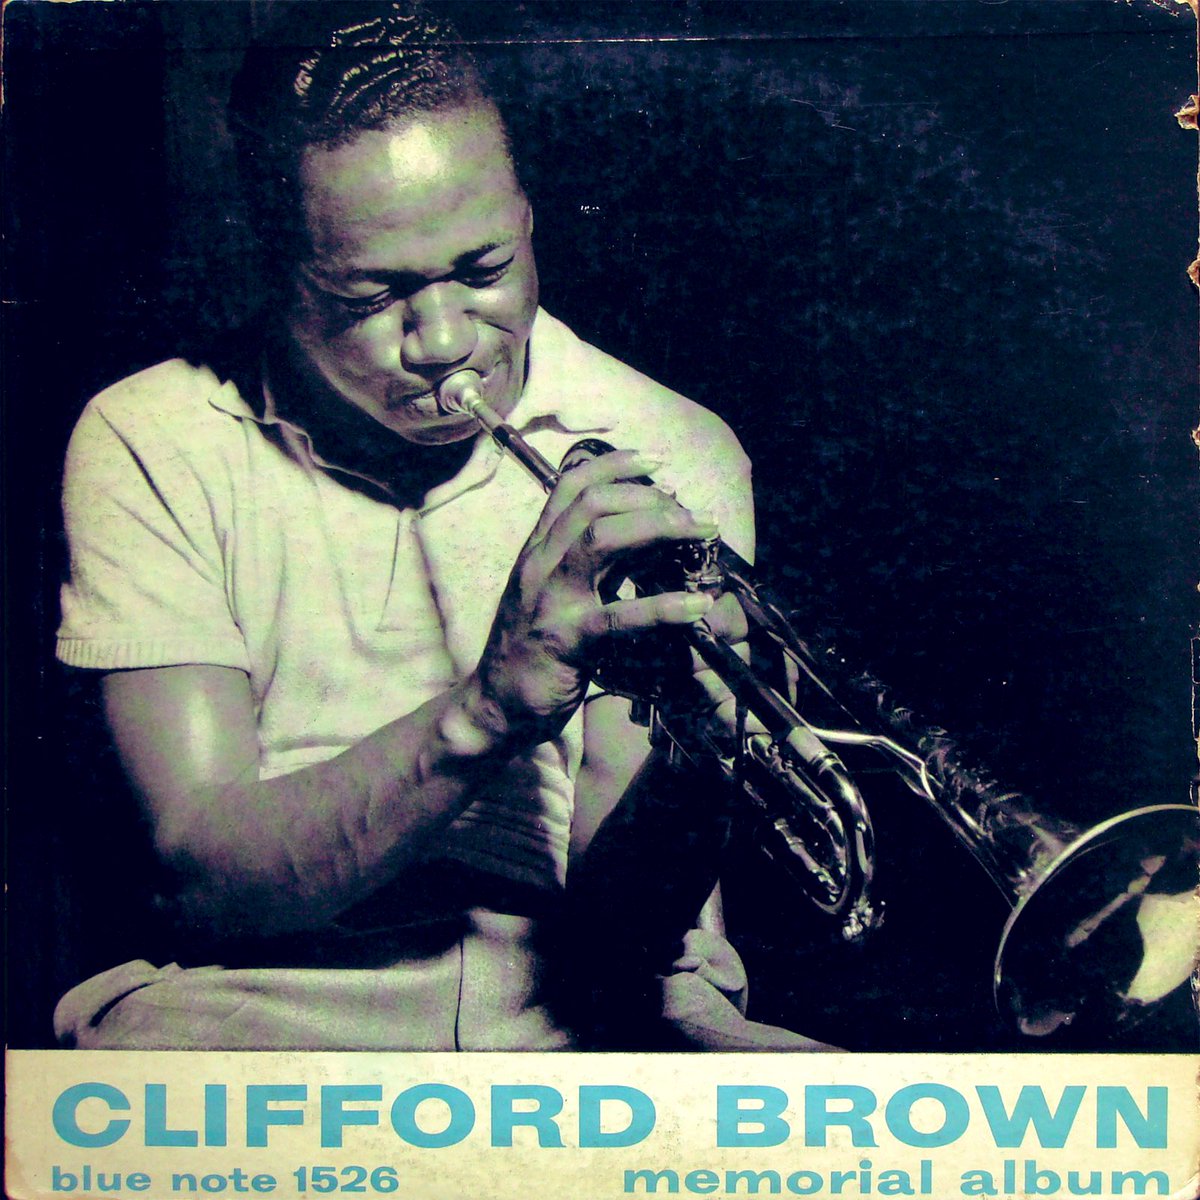 🎵 Blue Note Daily 🎵

Stop number twelve: BLP 1526: Clifford Brown Memorial Album (1956)

#CliffordBrown: trumpet 🎺 
#LouDonaldson: alto sax 🎷 
#ElmoHope: piano 🎹 
#PercyHeath: bass 🎸
#PhillyJoeJones: drums 🥁

Every day, I'll be taking you on a melodious journey through the